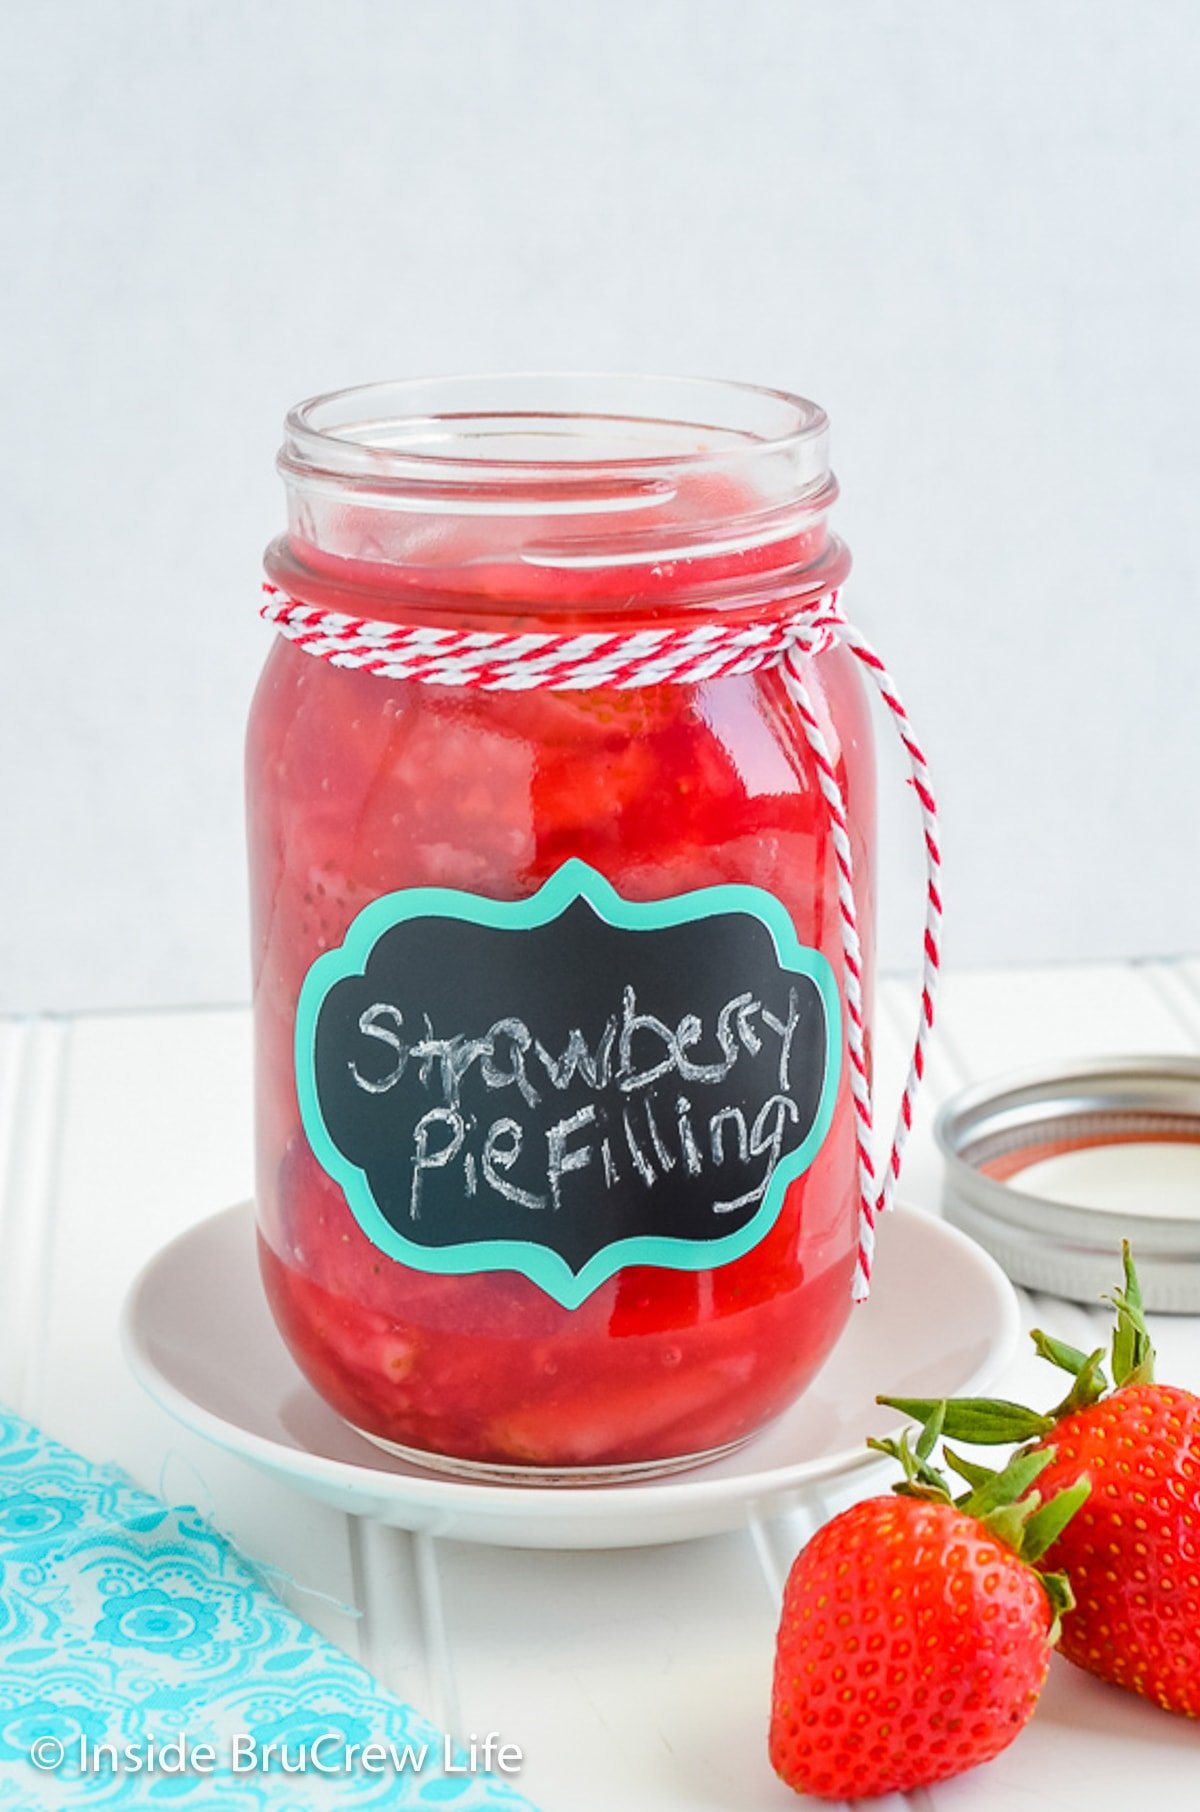 A clear Mason jar filled with homemade strawberry pie filling.